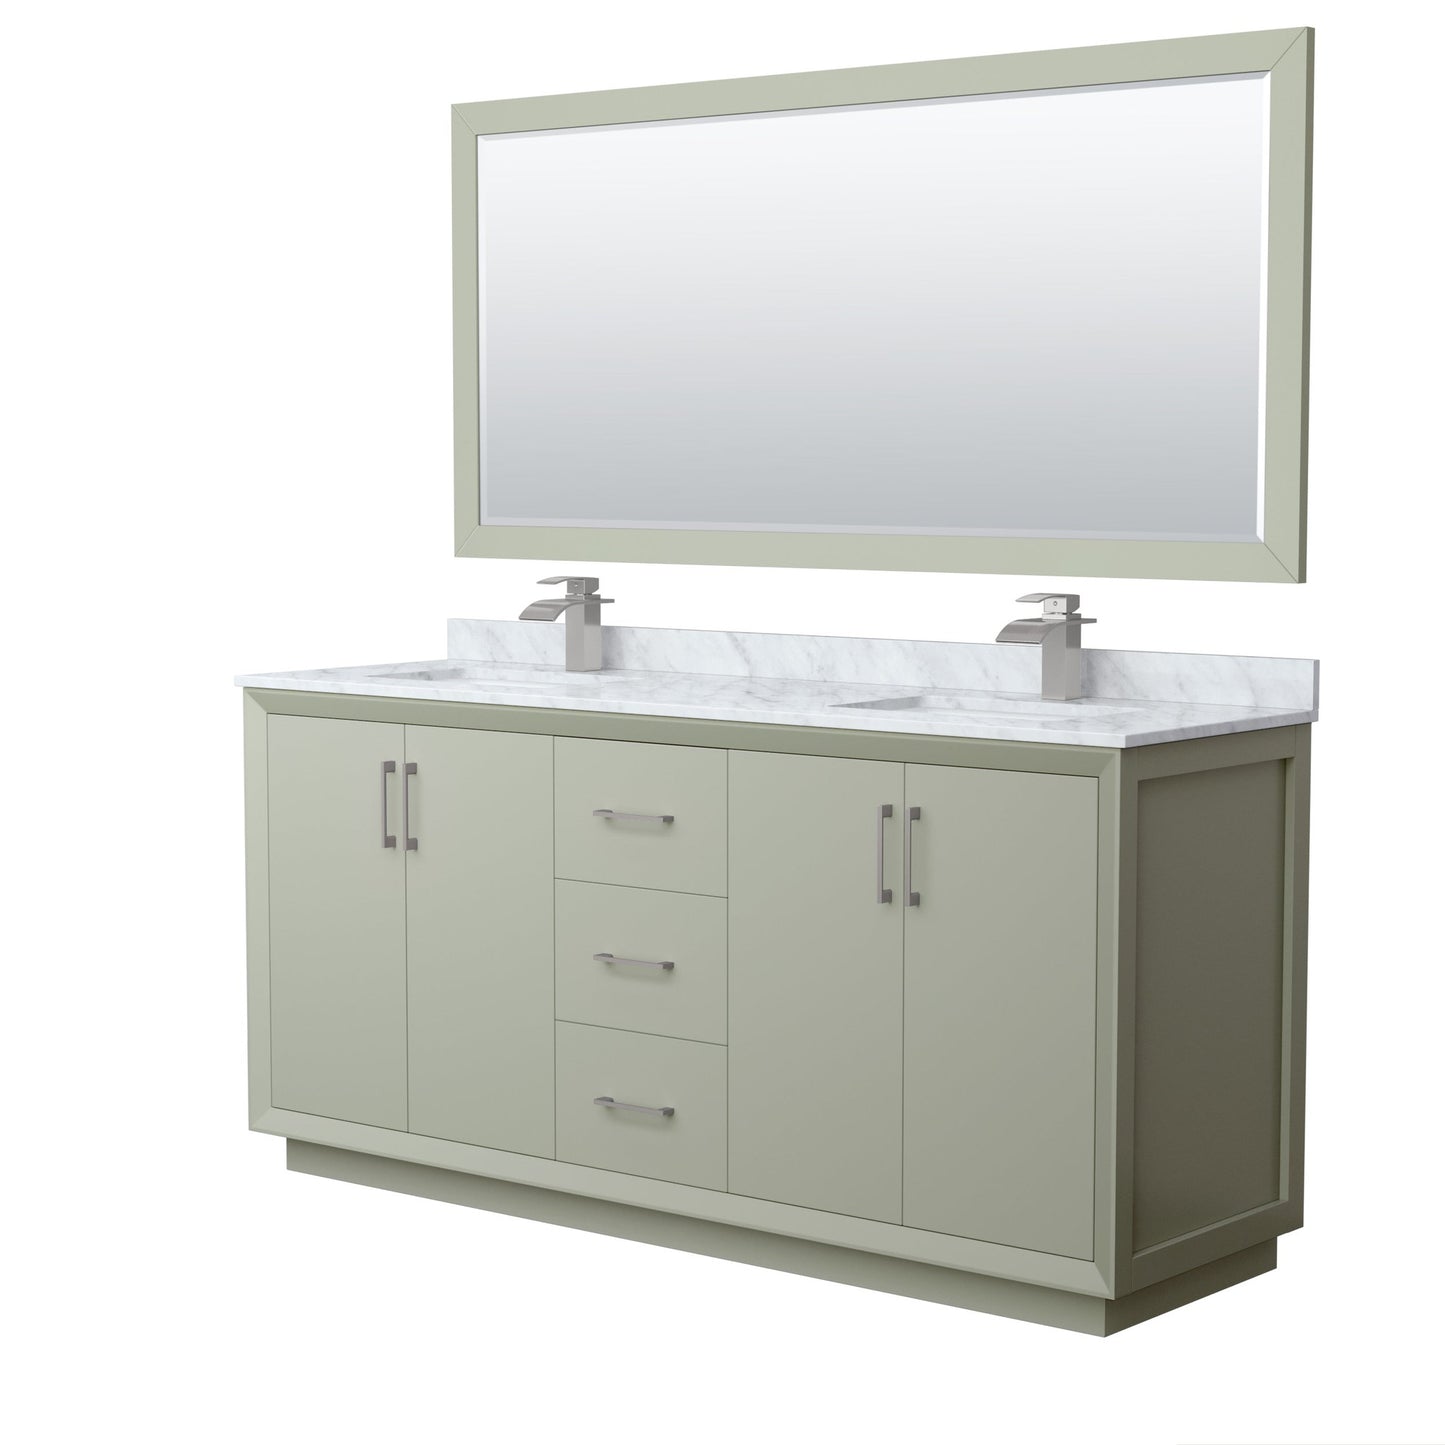 Wyndham Collection Strada 72" Double Bathroom Vanity in Light Green, White Carrara Marble Countertop, Undermount Square Sinks, Brushed Nickel Trim, 70" Mirror